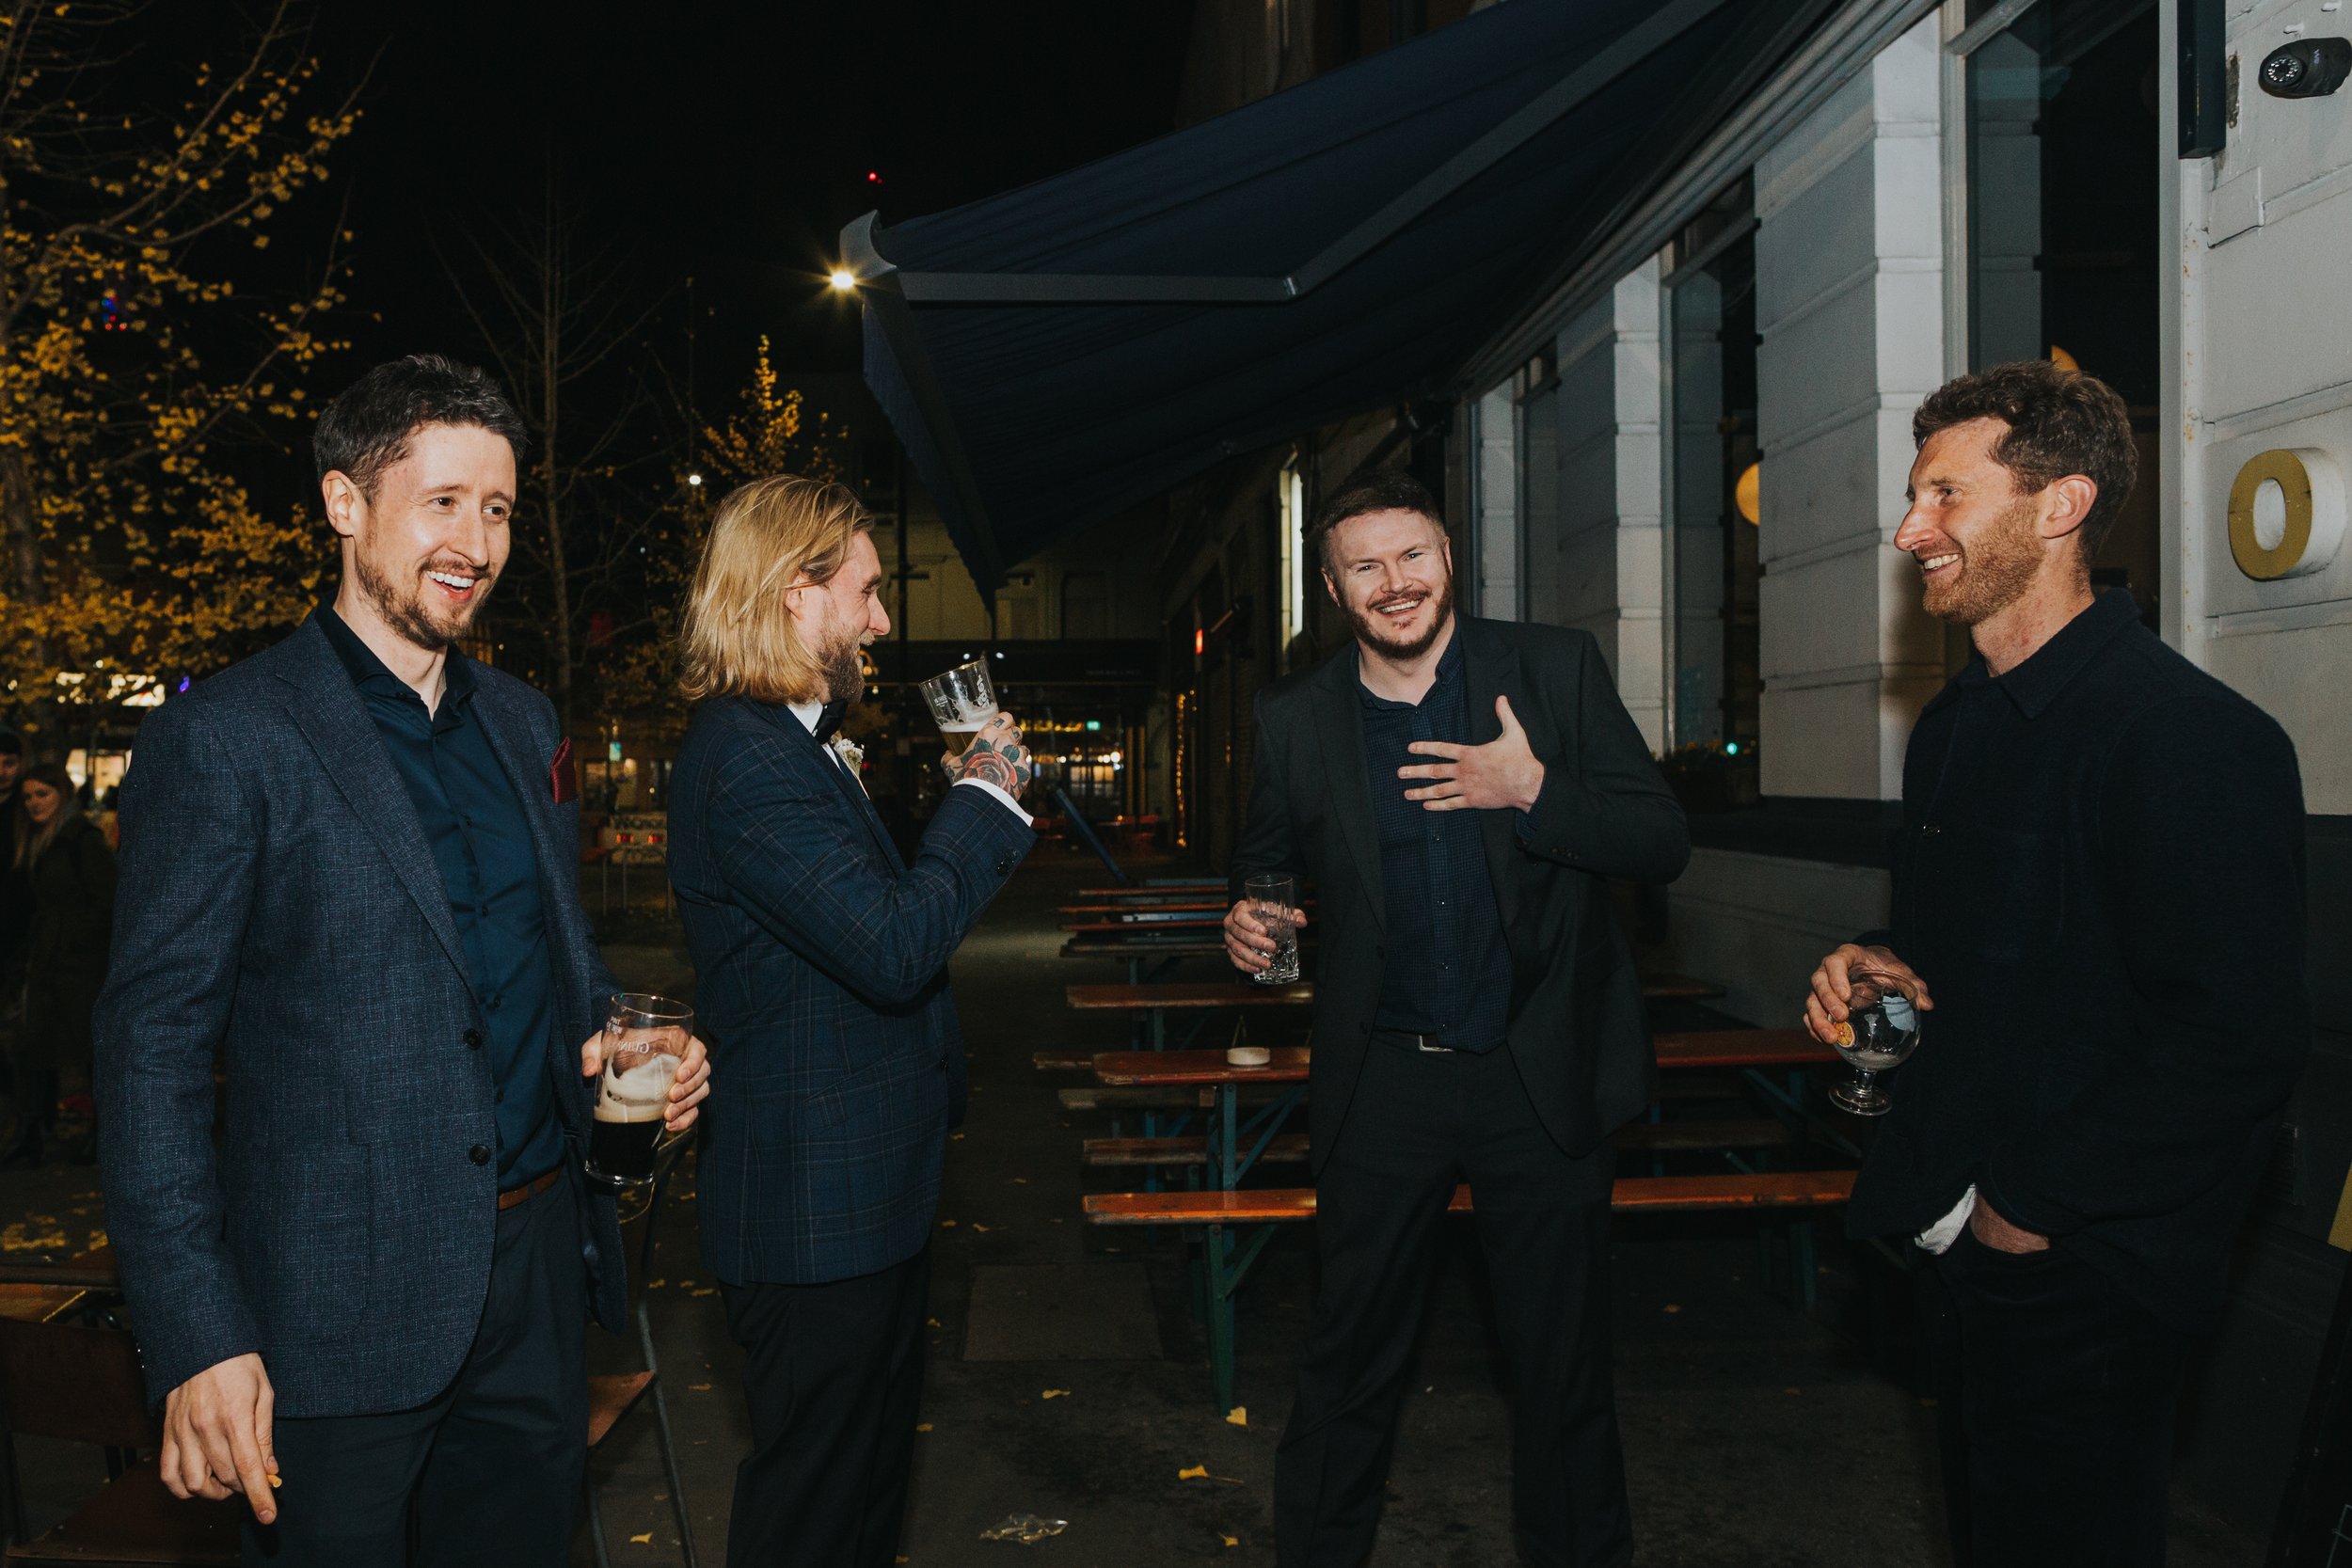 Groom and his groomsmen having a laugh outside the venue. 